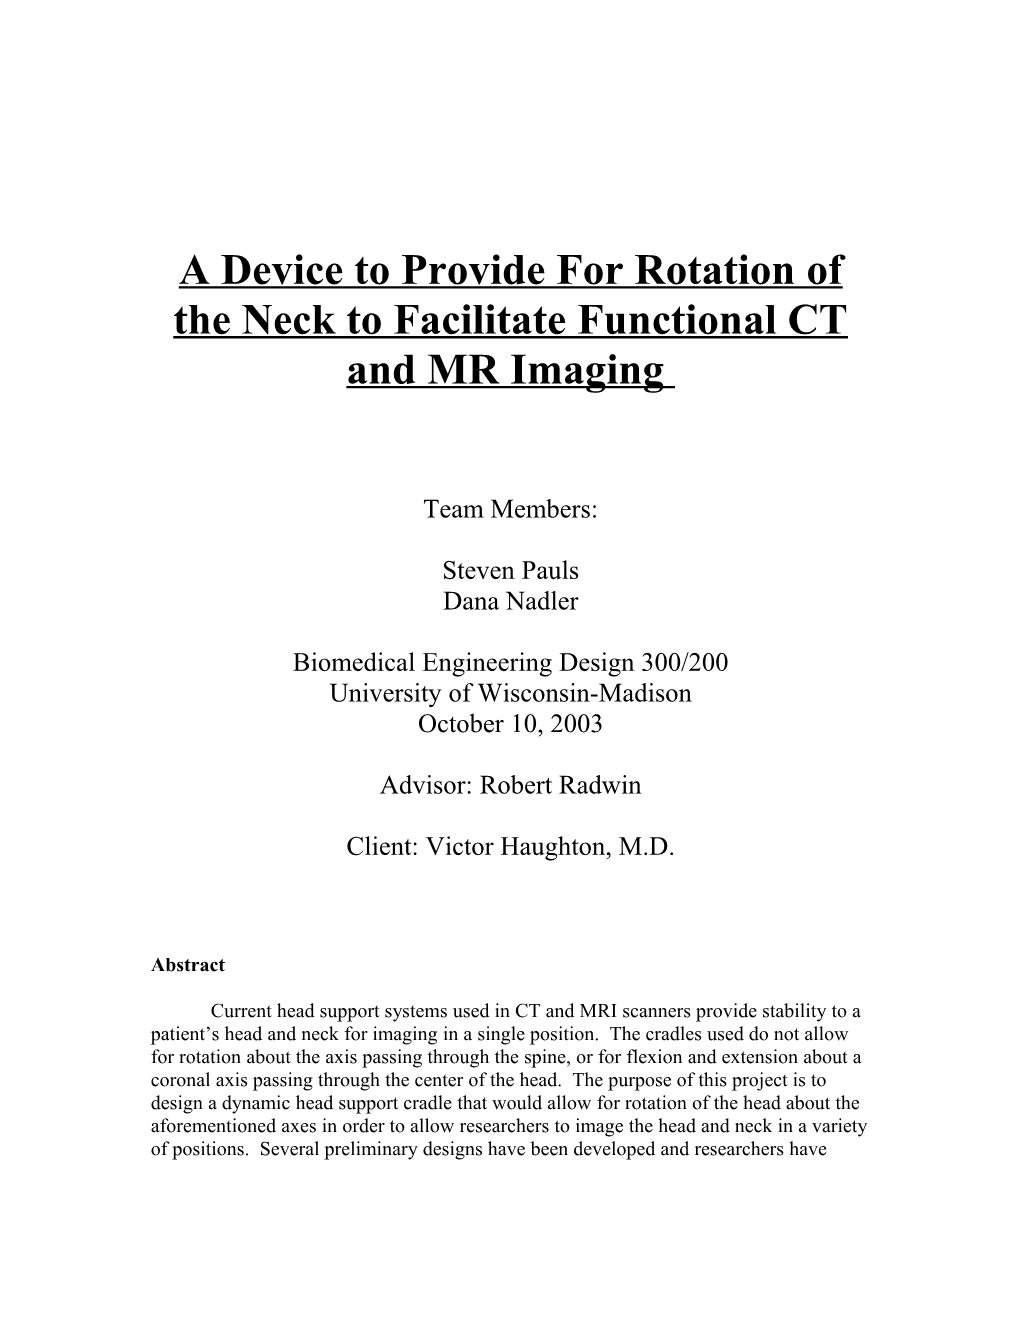 A Device to Provide for Rotation of the Neck to Facilitate Functional CT and MR Imaging